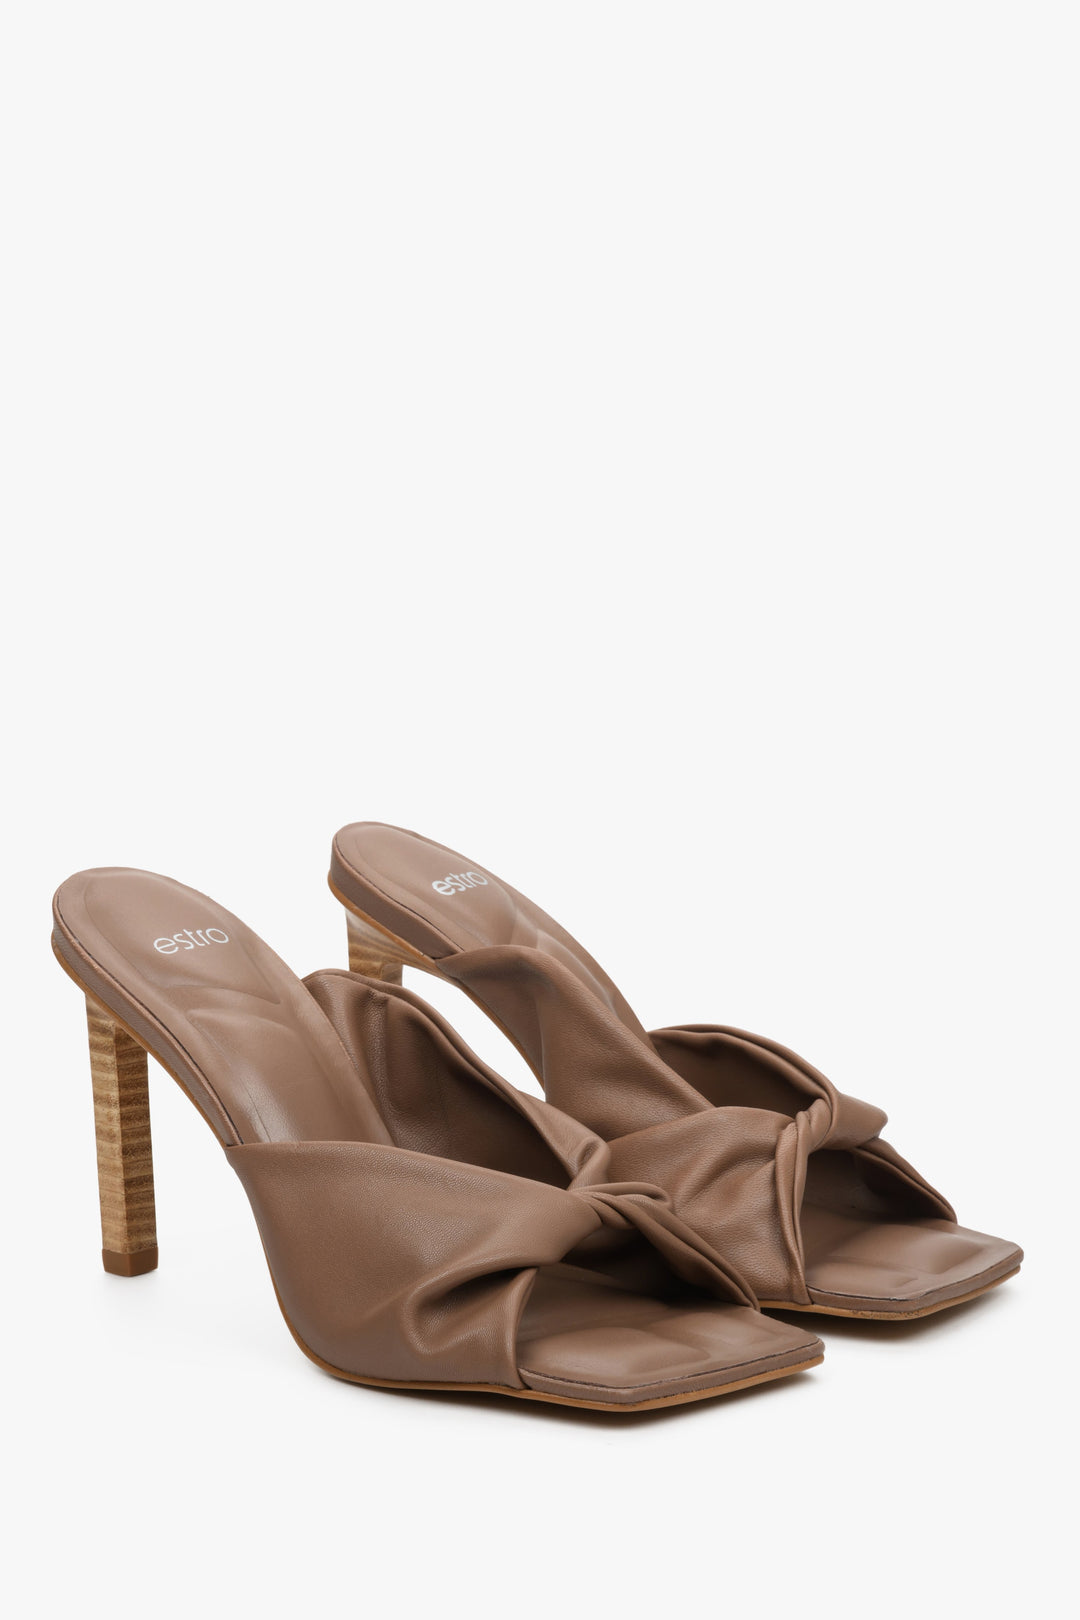 Women's Brown Mules with a Sturdy Heel Estro ER00112401.